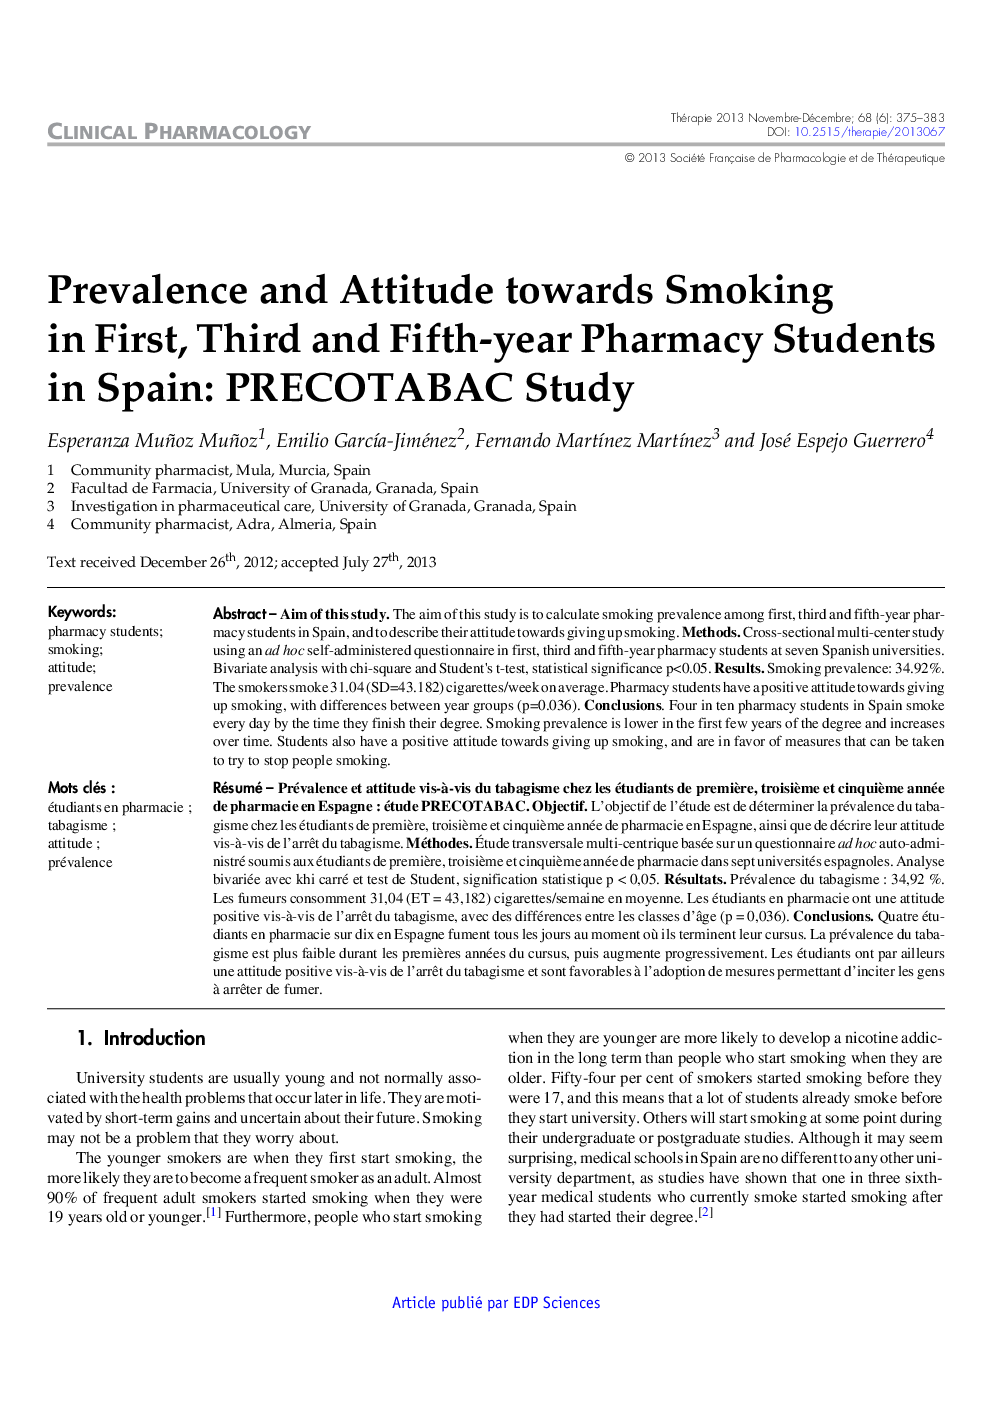 Prevalence and Attitude towards Smoking in First, Third and Fifth-year Pharmacy Students in Spain: PRECOTABAC Study